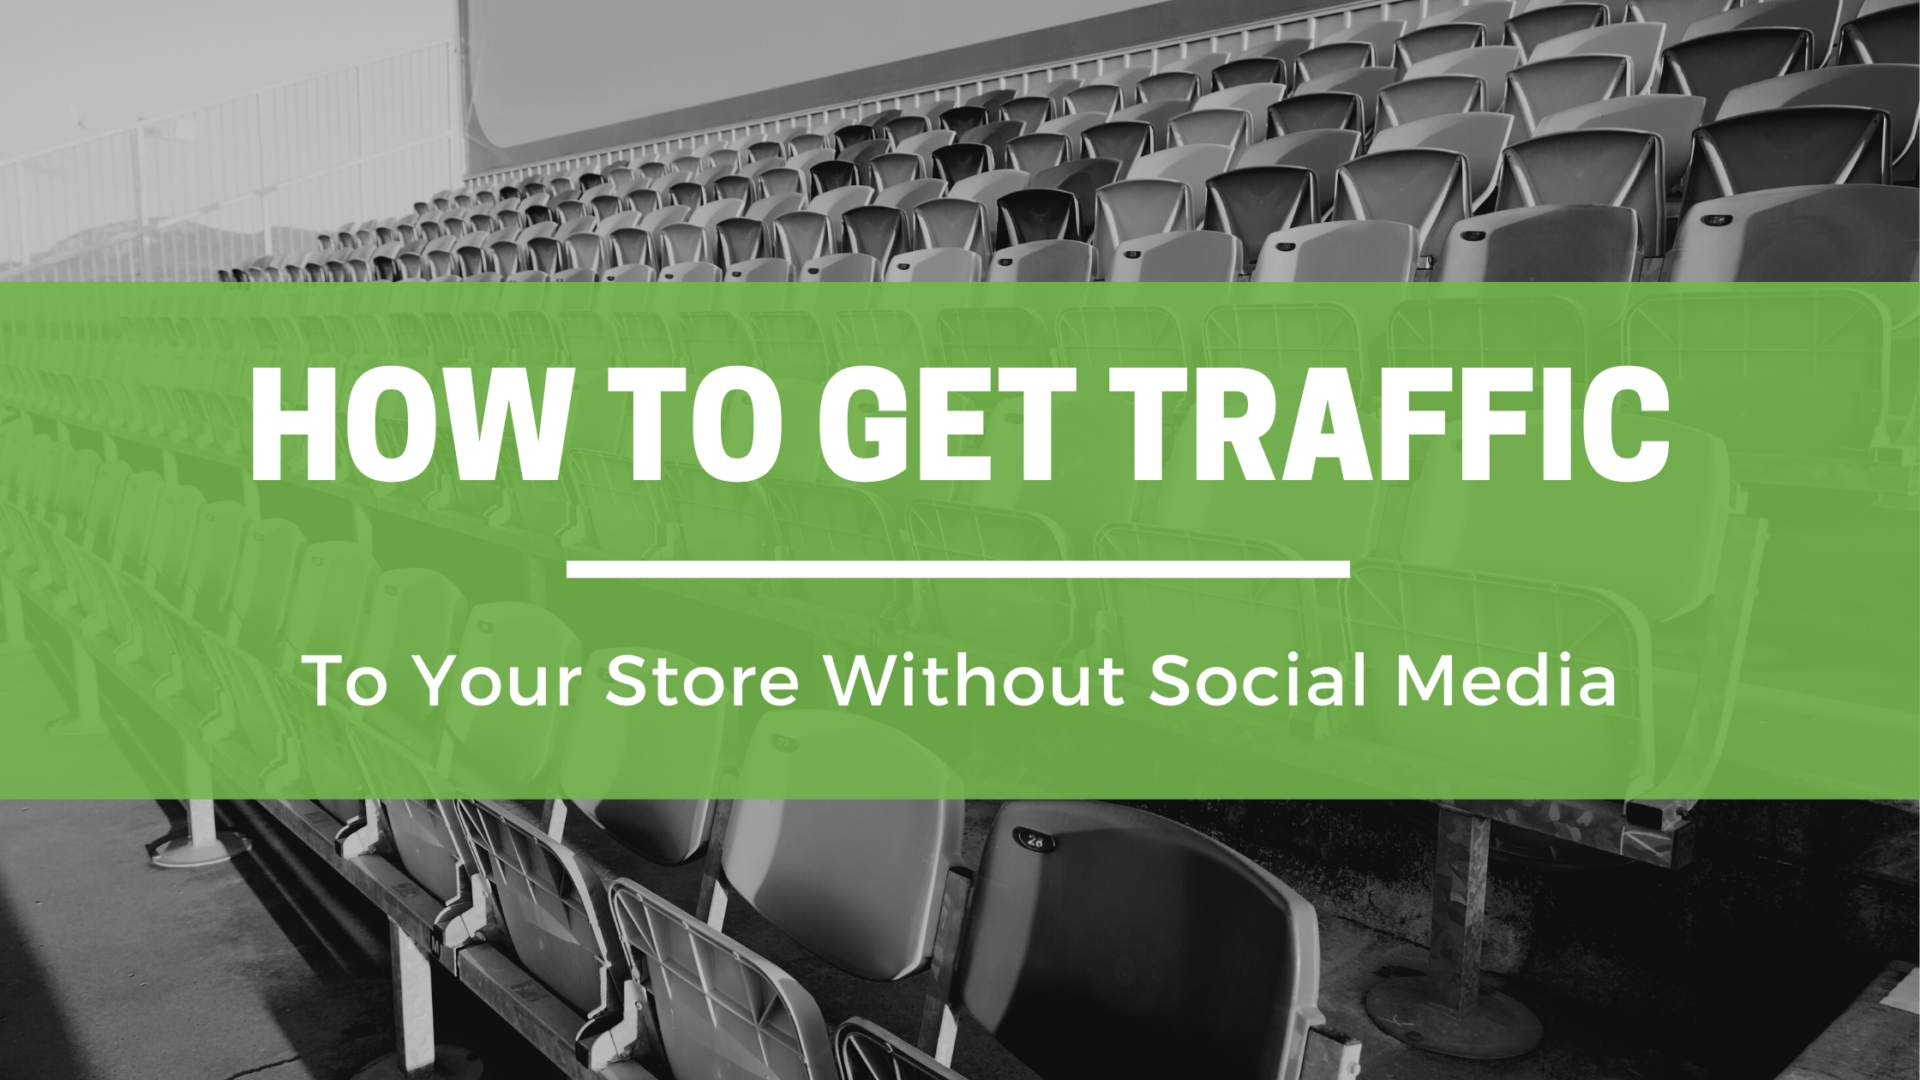 How To Get Traffic To Your Store Without Social Media